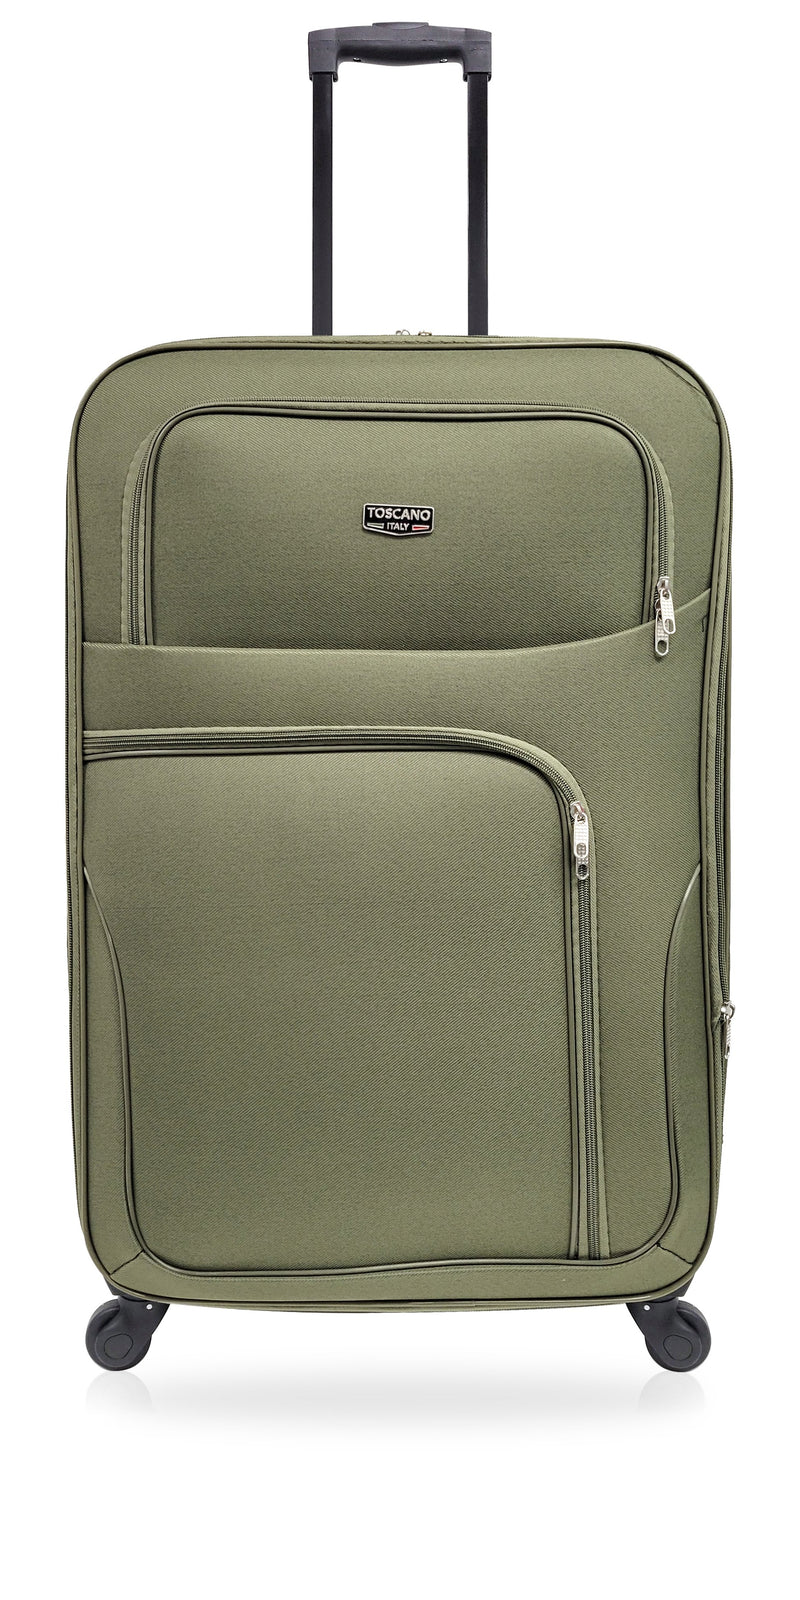 TOSCANO by Tucci 24-inch Allacciare Carry On Lightweight Luggage Suitcase